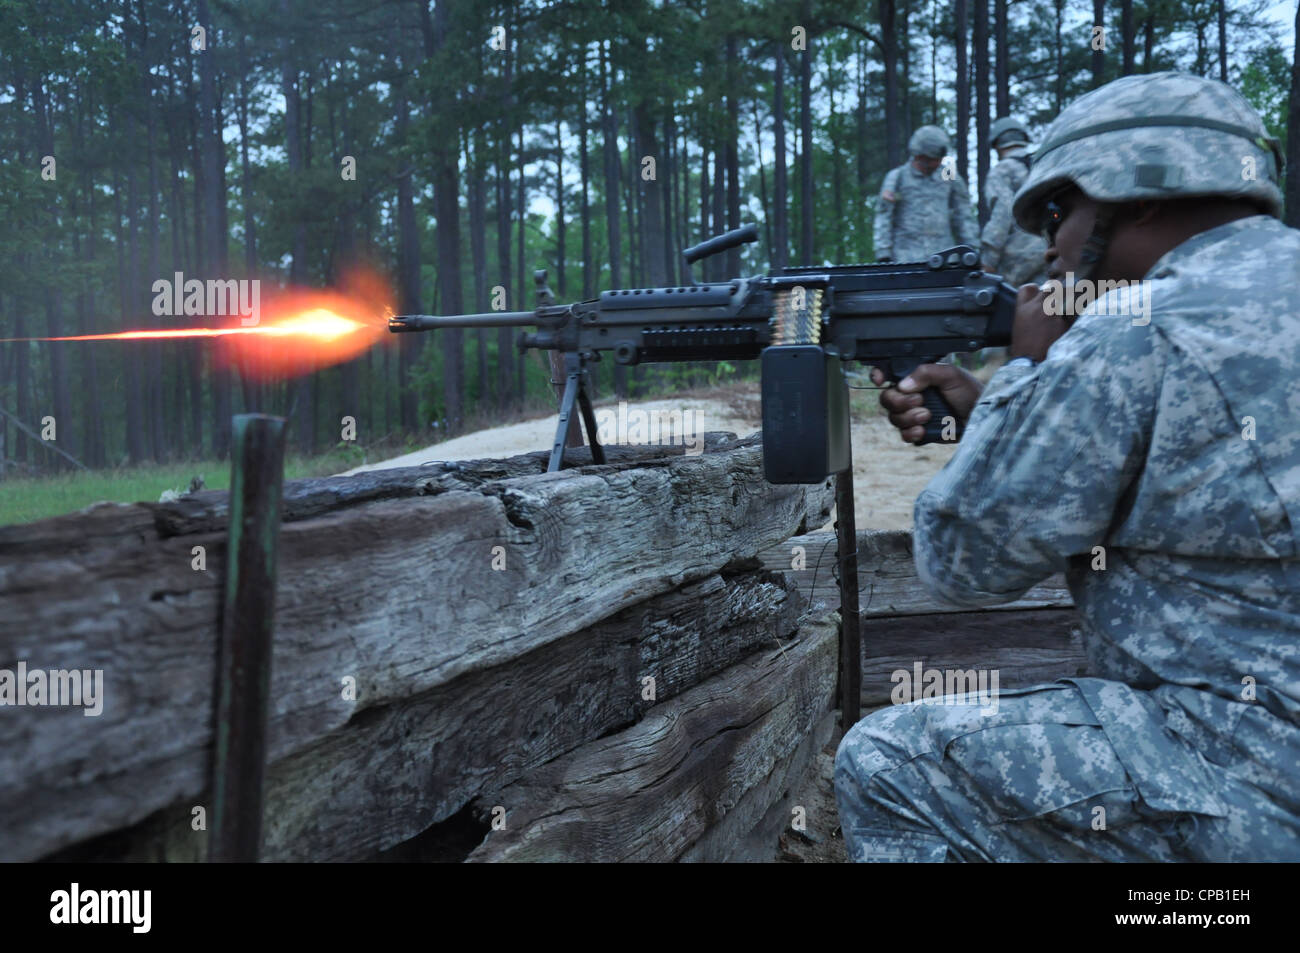 Sgt. Carl Hawthorne of the 273rd Military Police Company (Rear Detachment), District of Columbia National Guard, fires tracer rounds from an M249 machine gun during crew-served weapon night fire training at Fort A.P. Hill, Va., May 5, 2012. Stock Photo